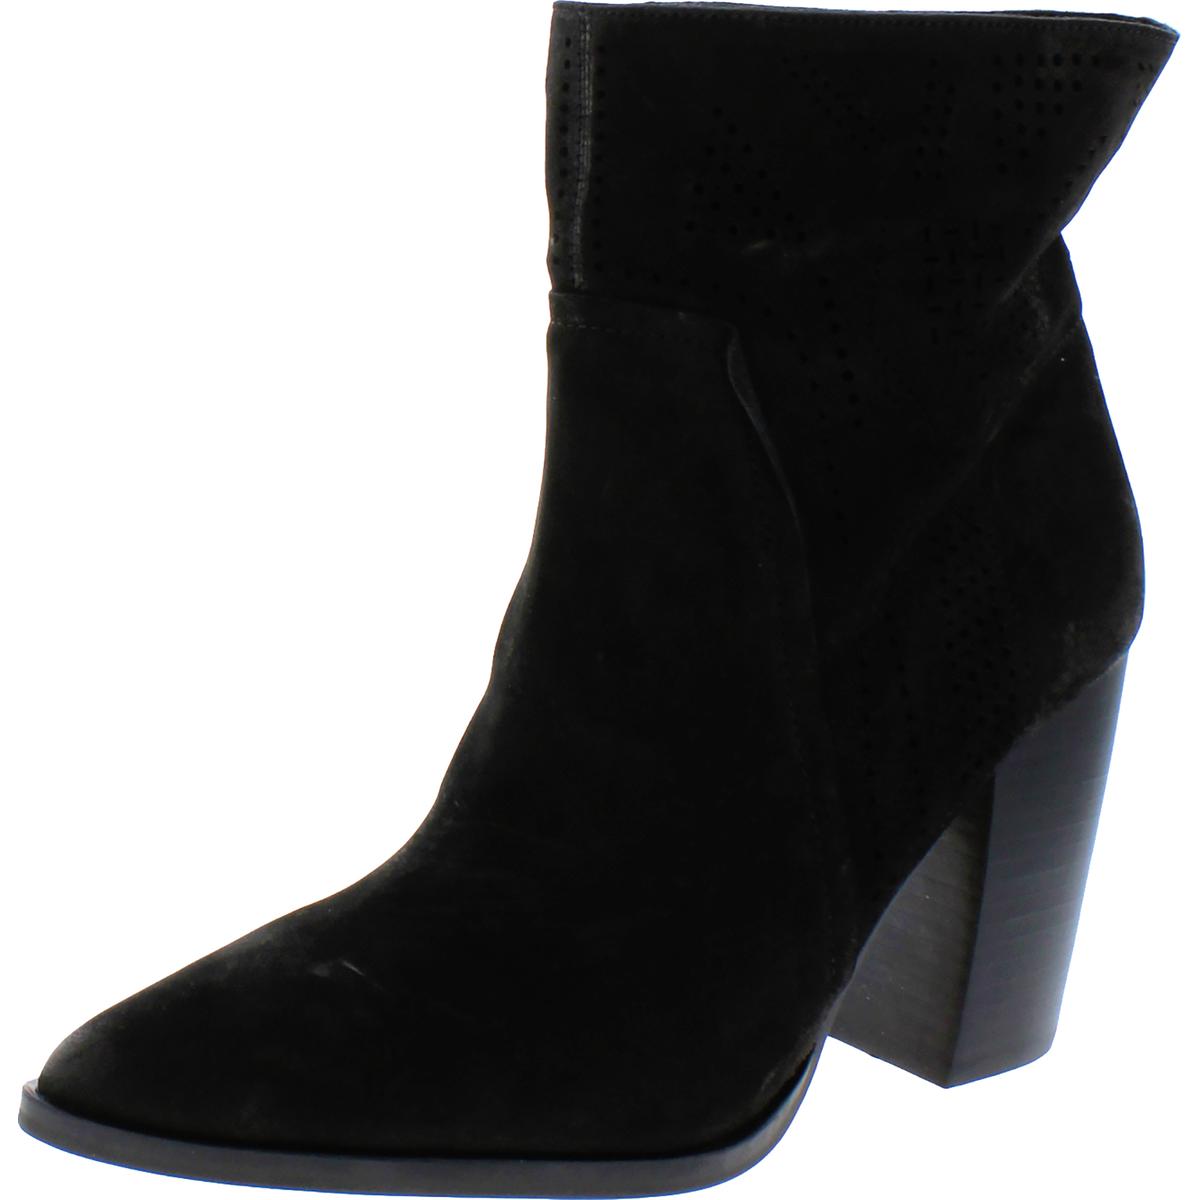 Vince Camuto Womens Catheryna Black Suede Booties Shoes 6 Medium (B,M ...